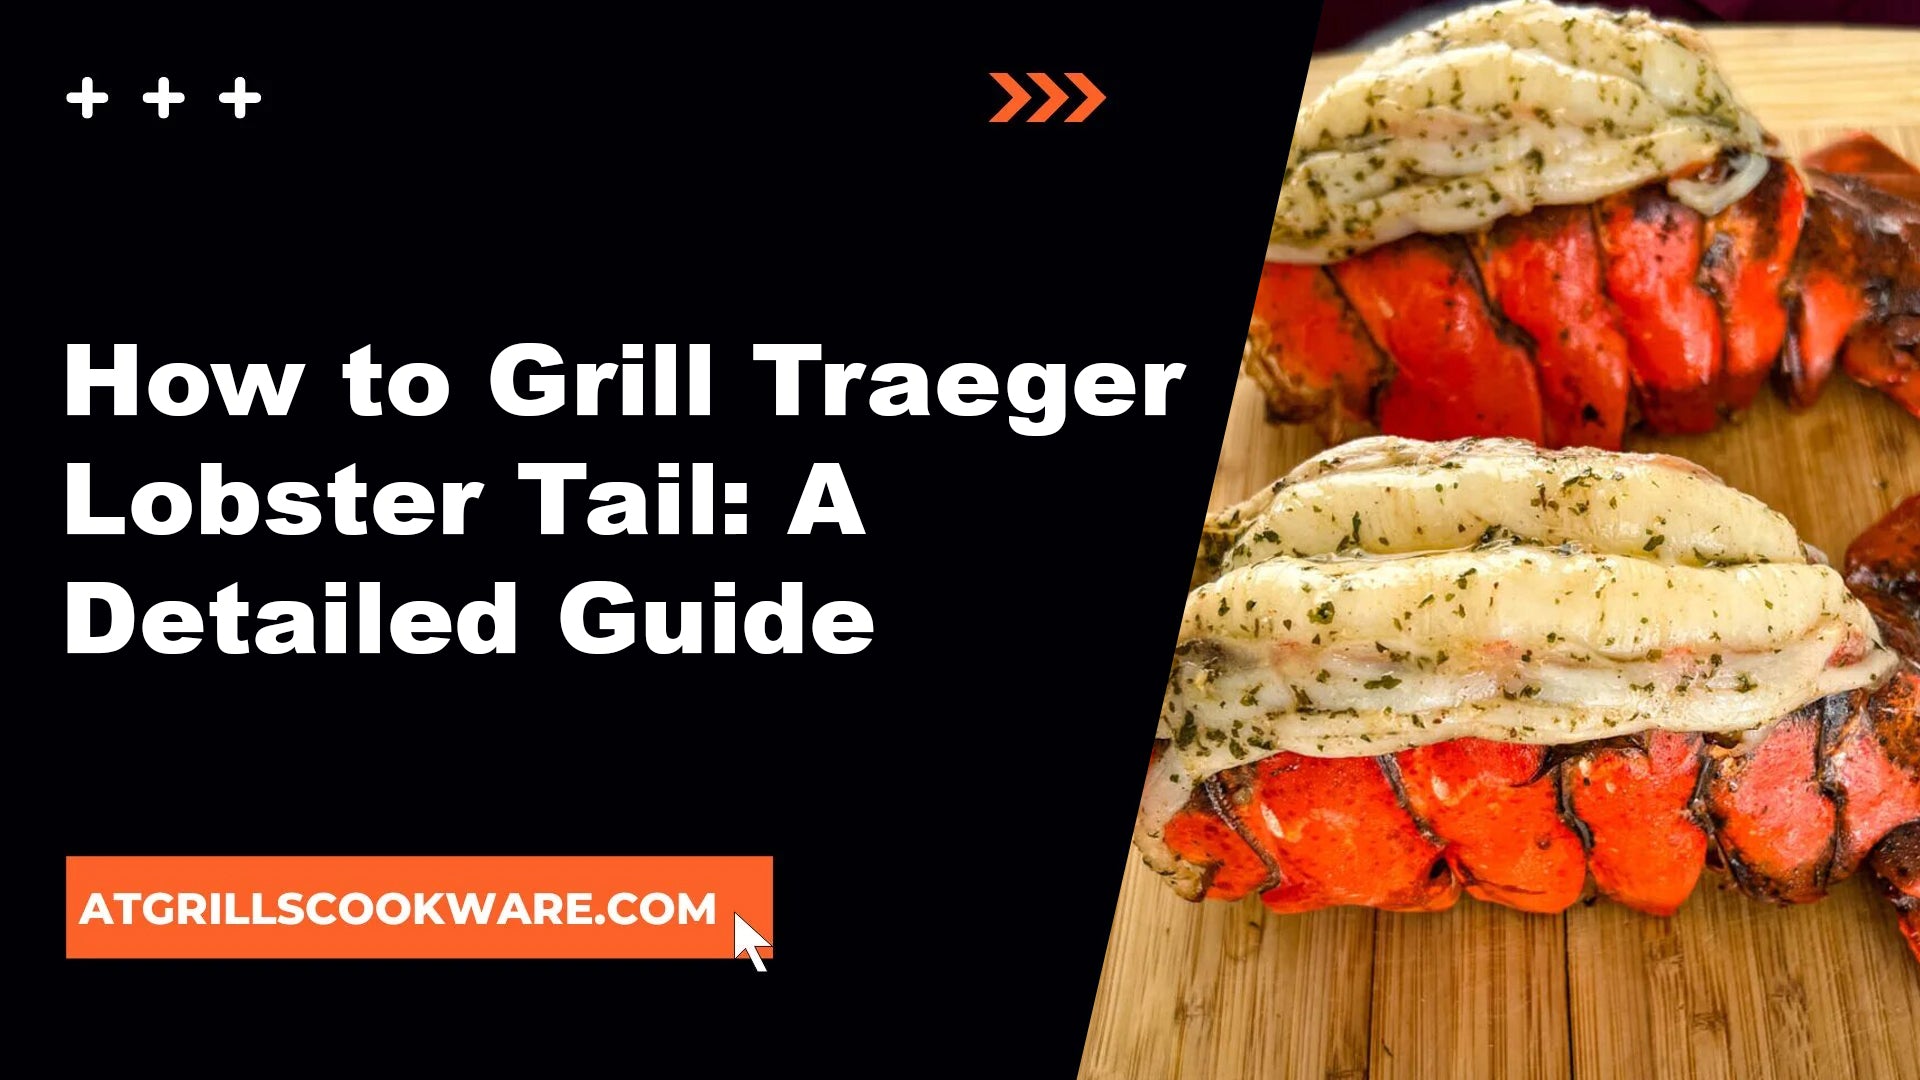 How to Grill Traeger Lobster Tail: A Detailed Guide